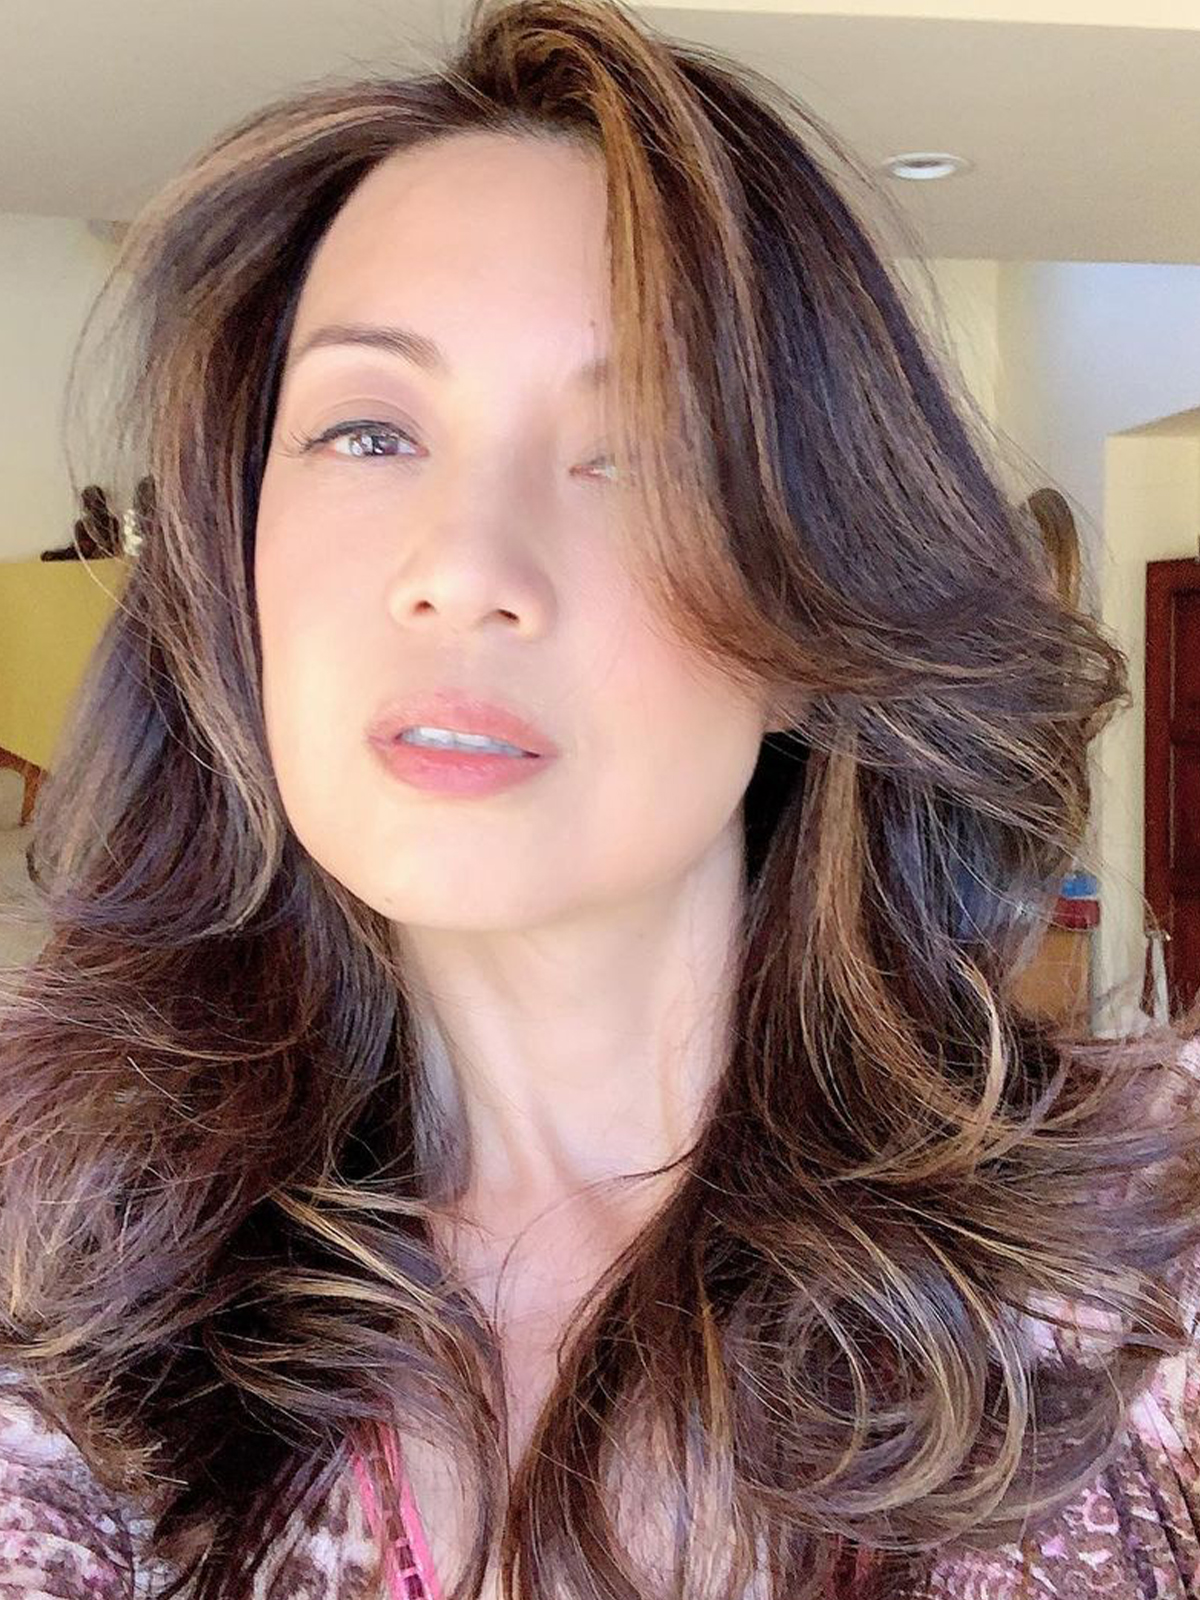 Haircuts for Women in Their 50s: Ming-Na Wen